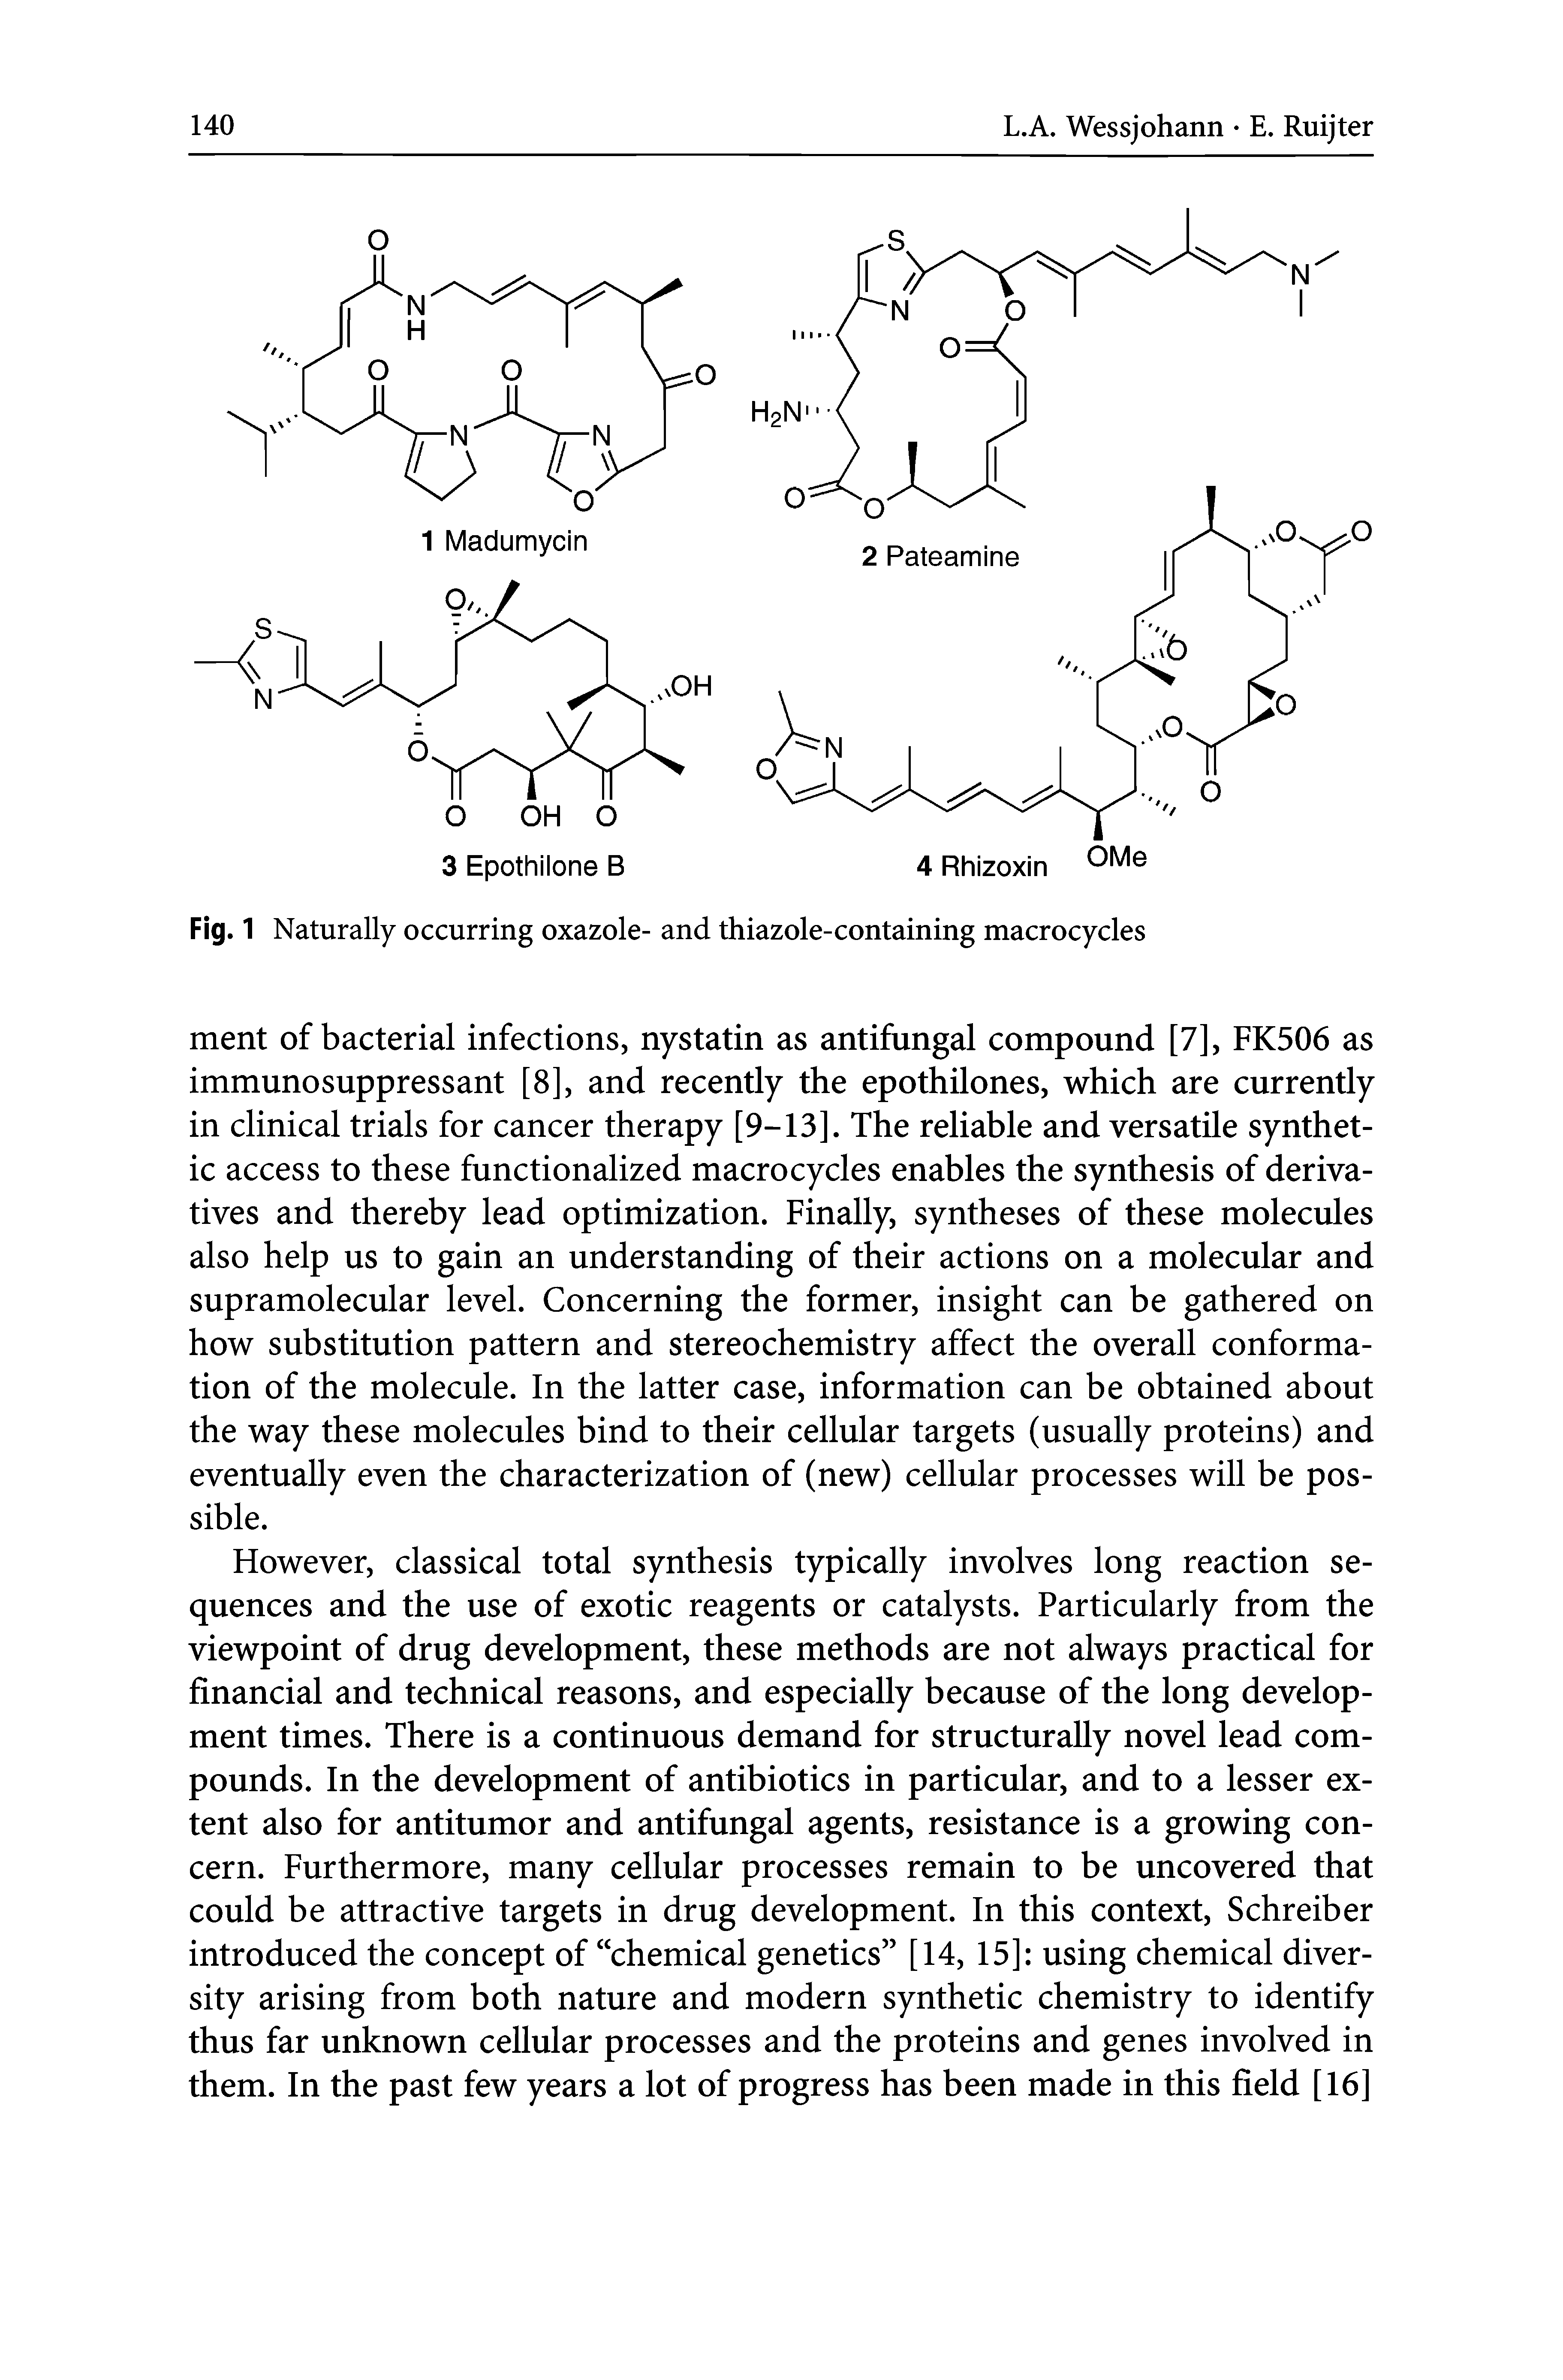 Fig. 1 Naturally occurring oxazole- and thiazole-containing macrocycles...